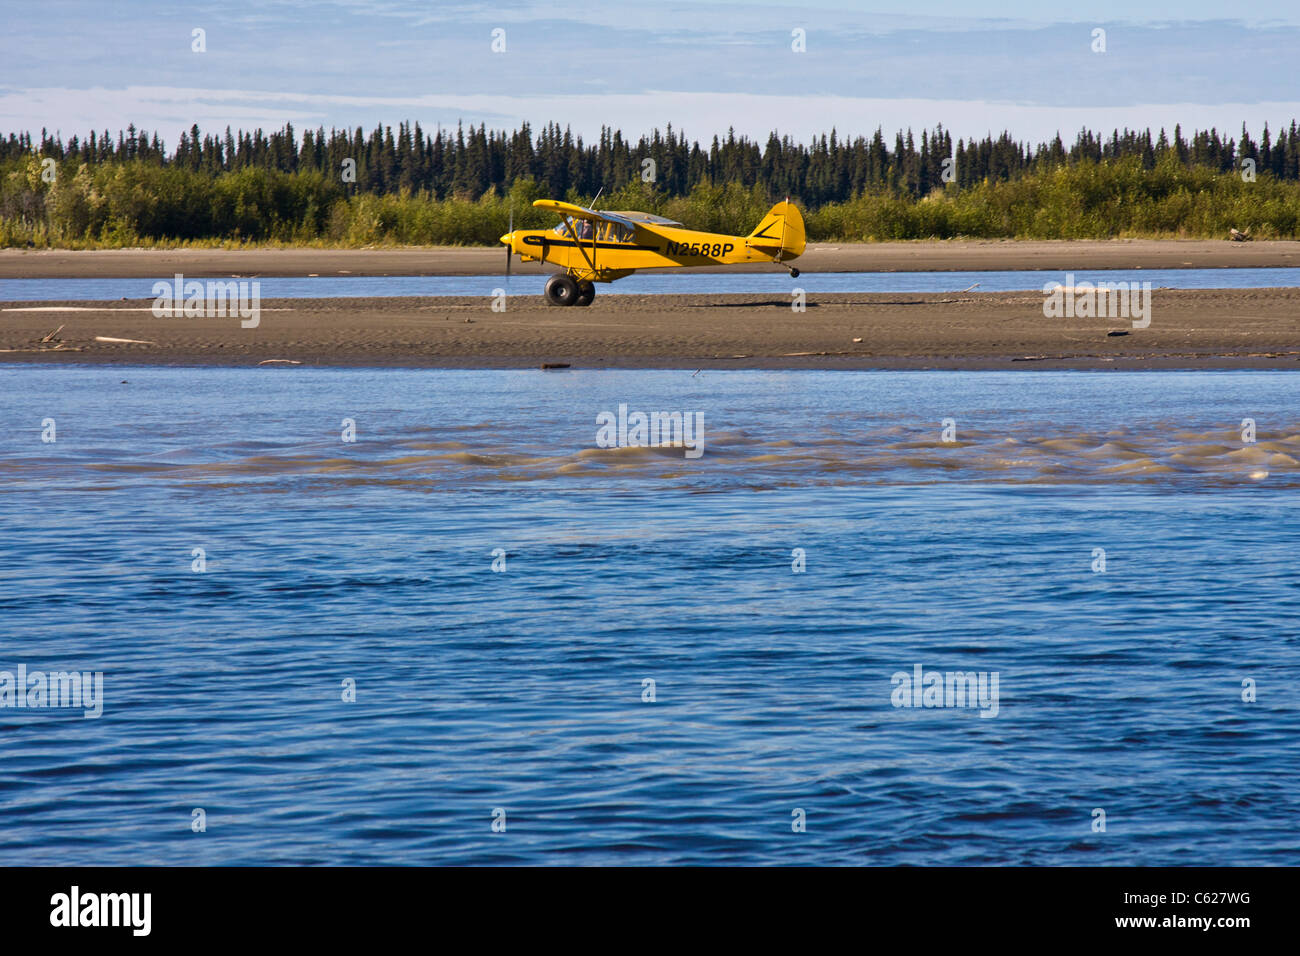 Small plane demonstrating taking off and landing on a narrow strip of land, a sand bar in the Chena River, at Fairbanks, Alaska. Stock Photo